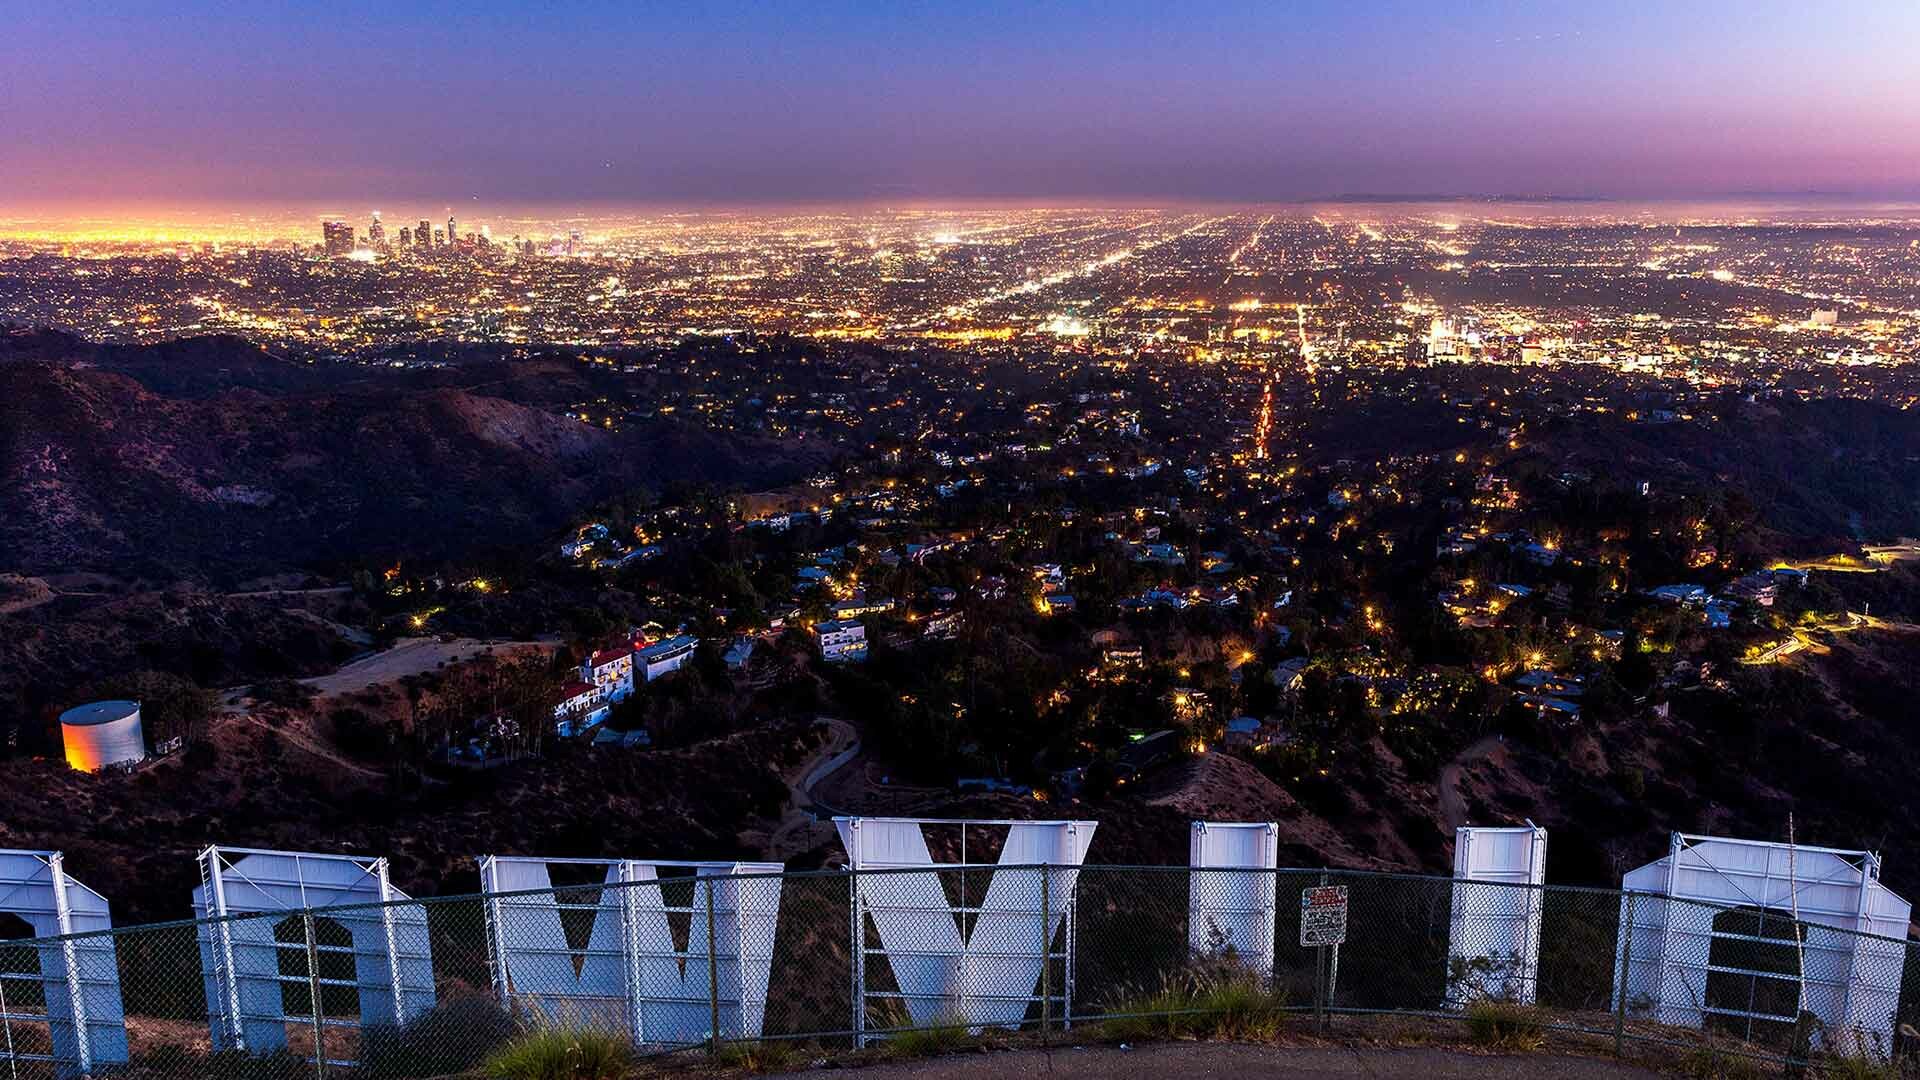 Hollywood Sign: The landmark located north of Mulholland Highway and south of Forest Lawn Memorial Park cemetery. 1920x1080 Full HD Wallpaper.